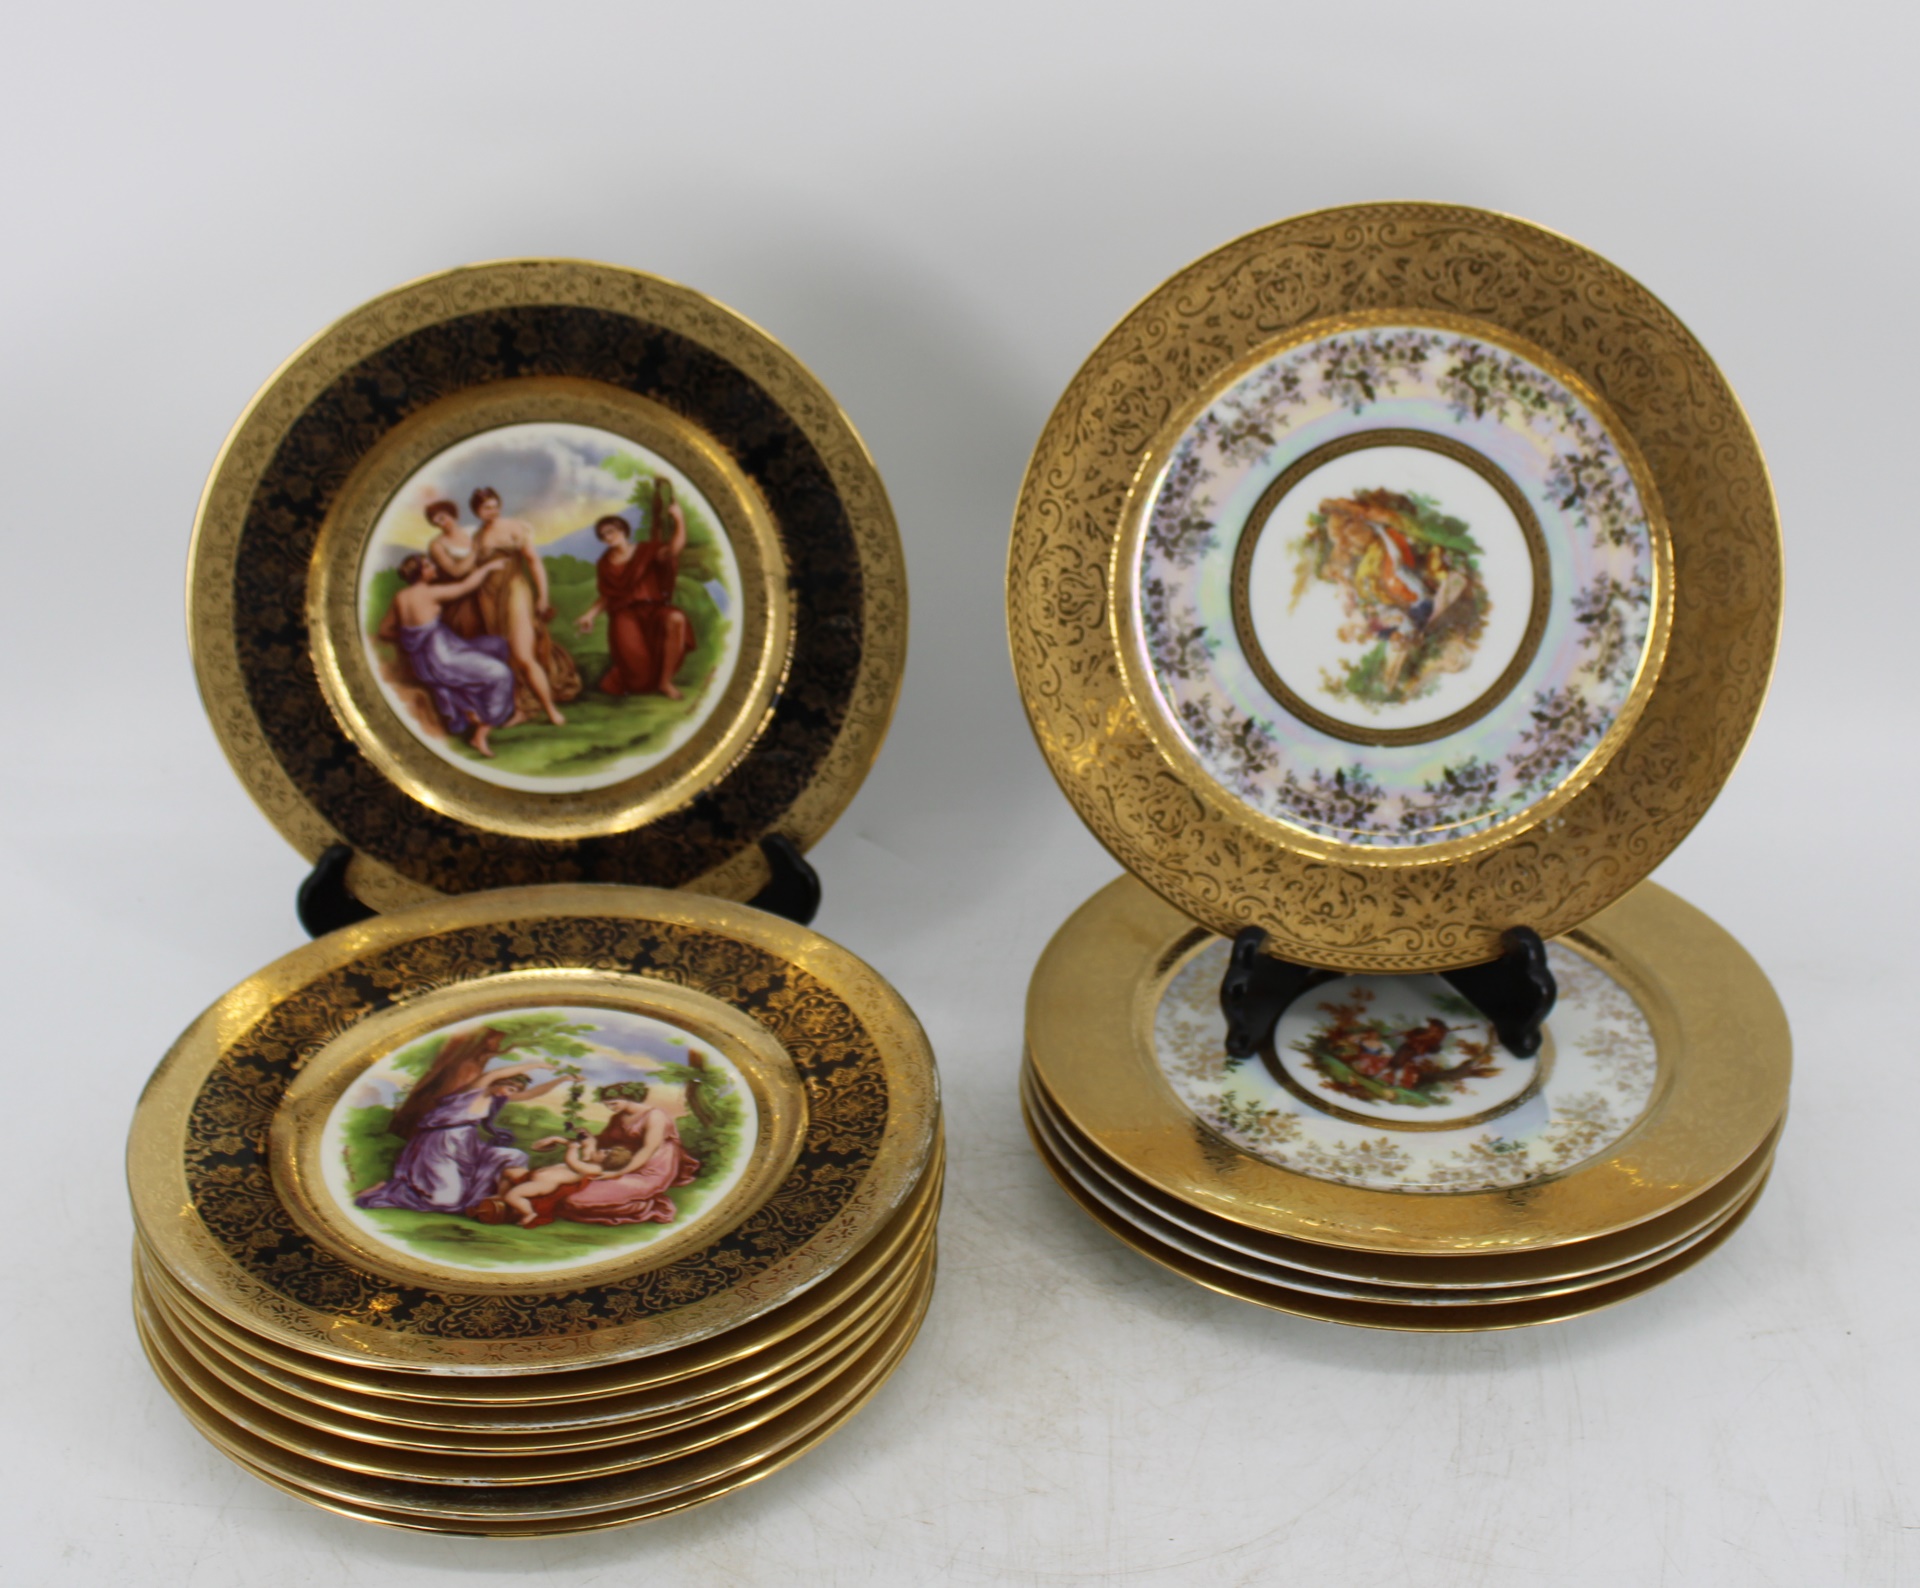 LIMOGES AND ROYAL CHINA GILT DECORATED 3bd704